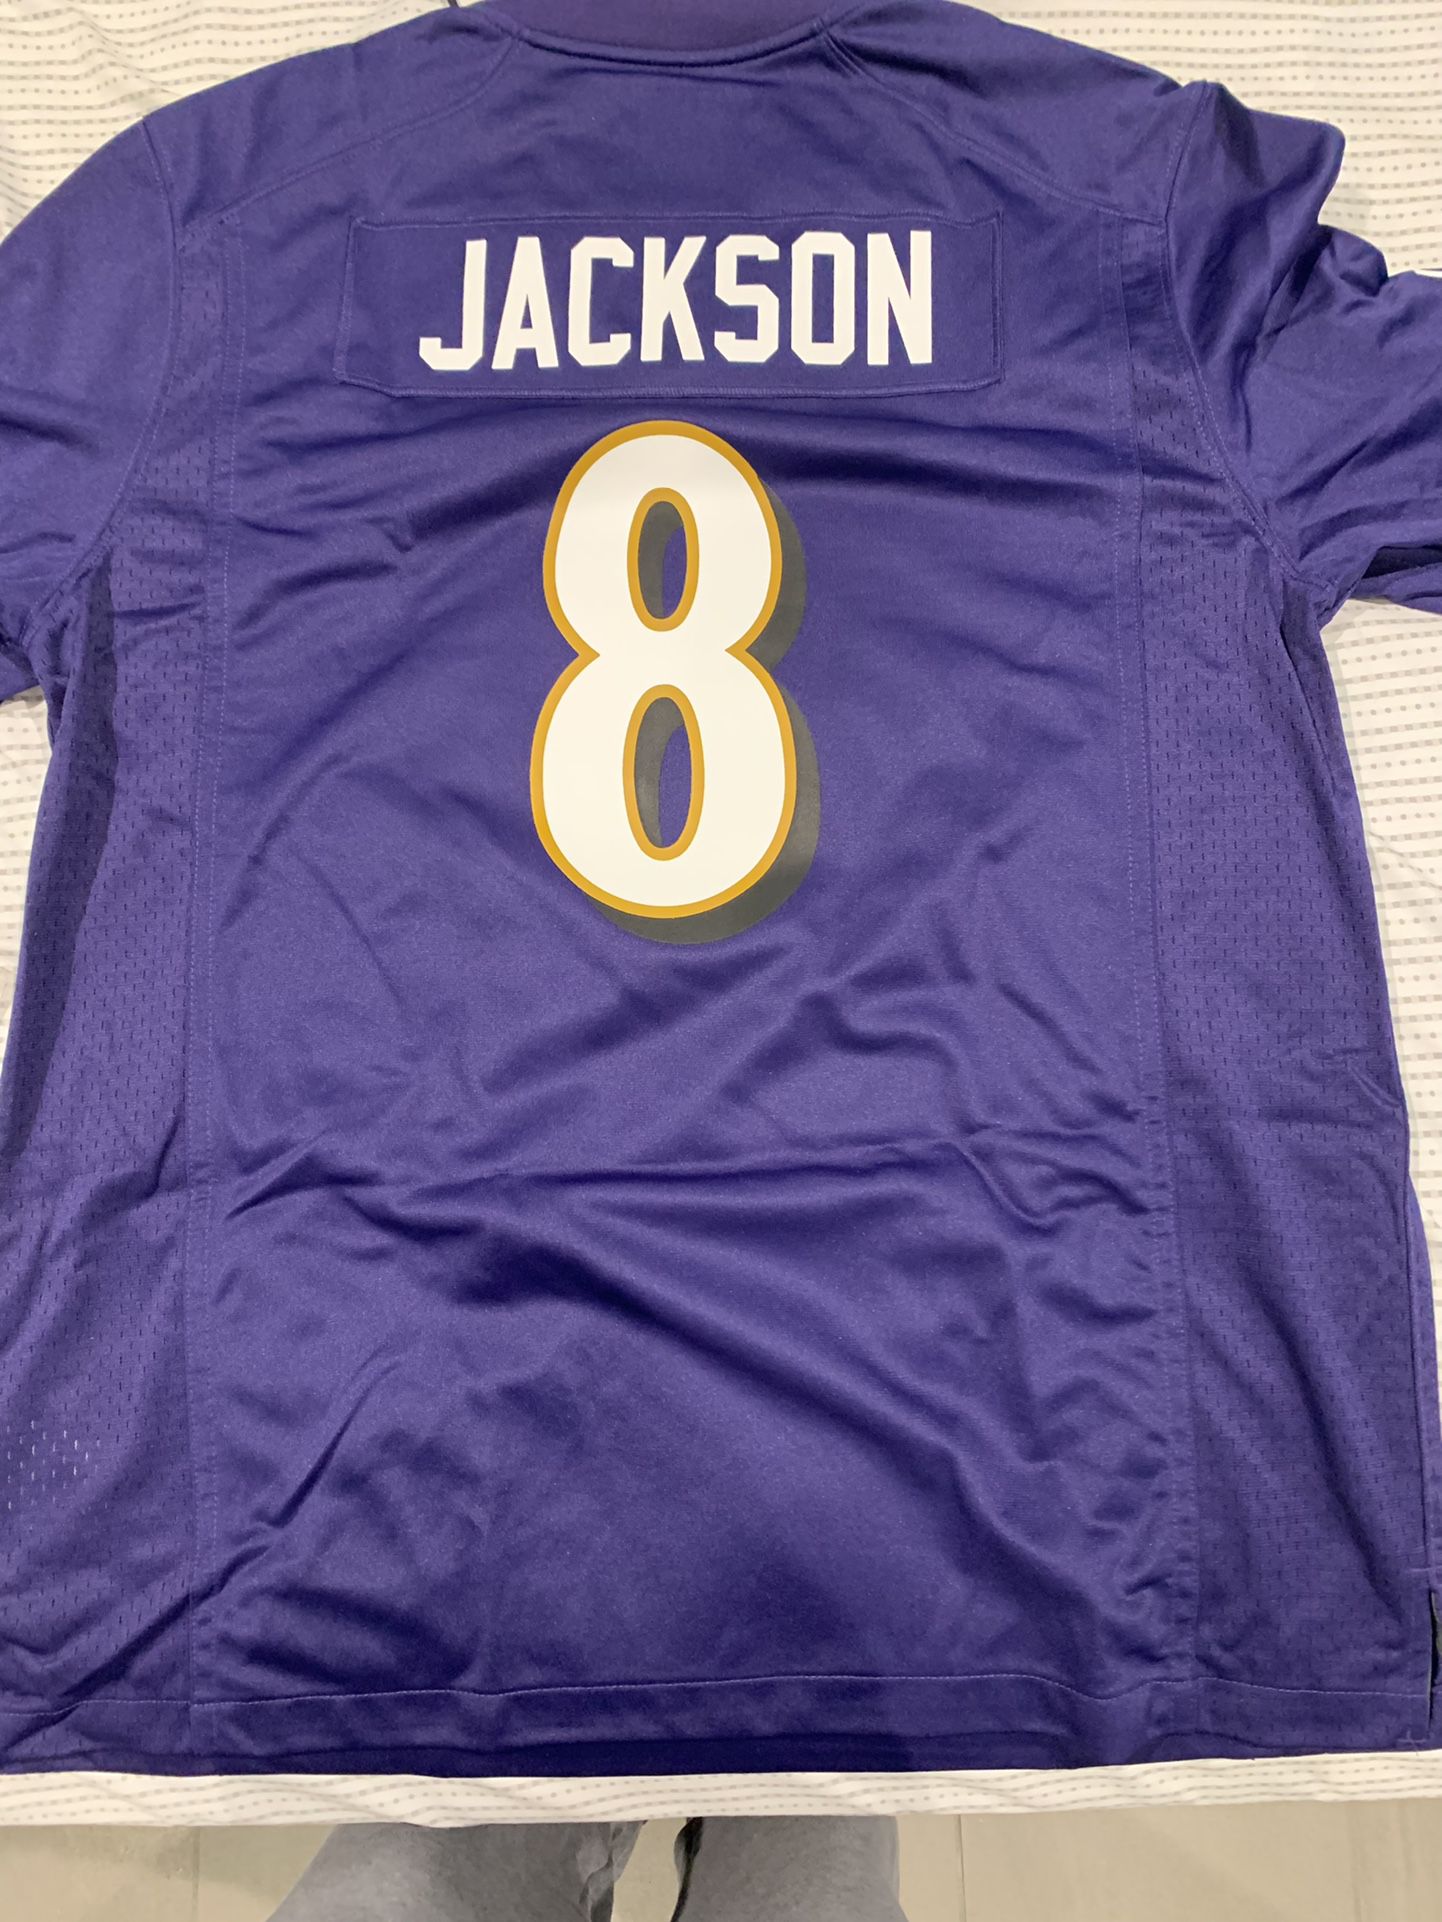 Lamar Jackson Jersey Size L for Sale in Westminster, CA - OfferUp